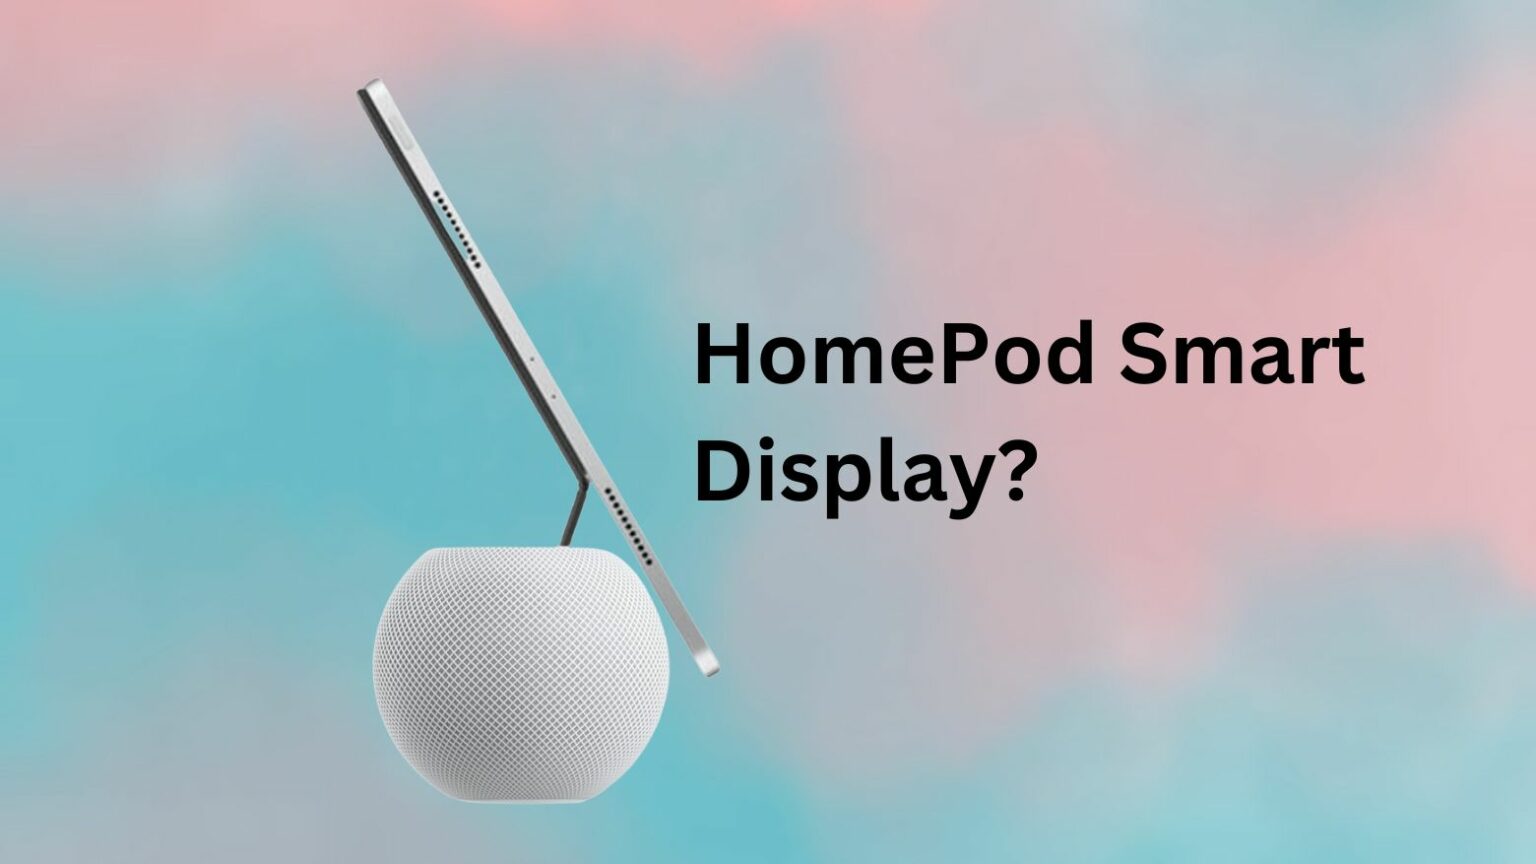 HomePod with a 7-inch display concept